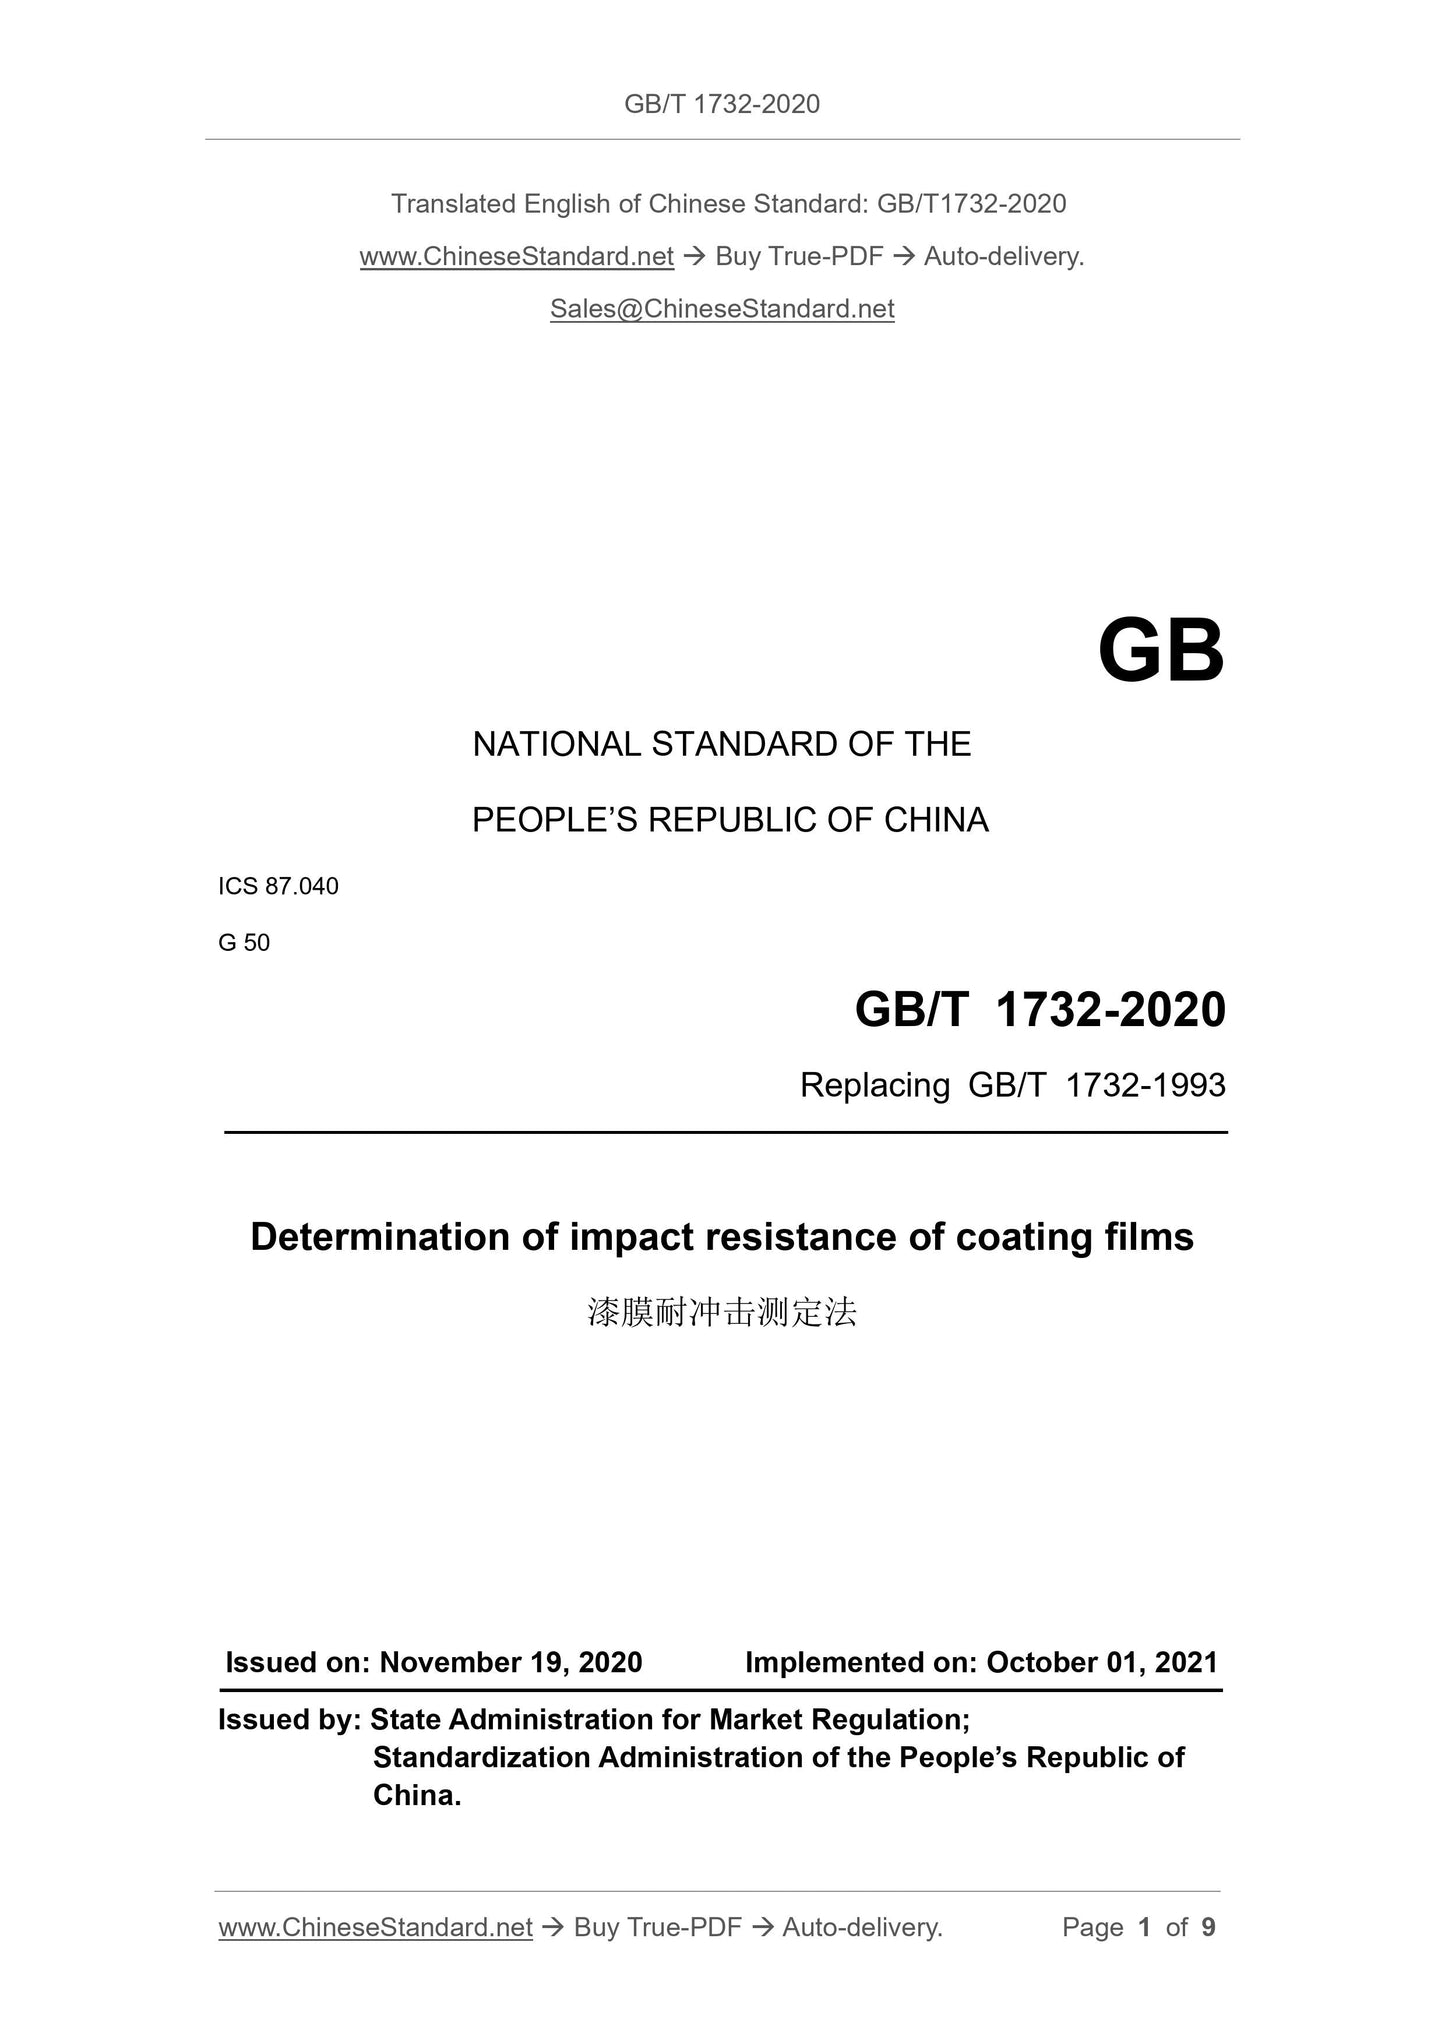 GB/T 1732-2020 Page 1